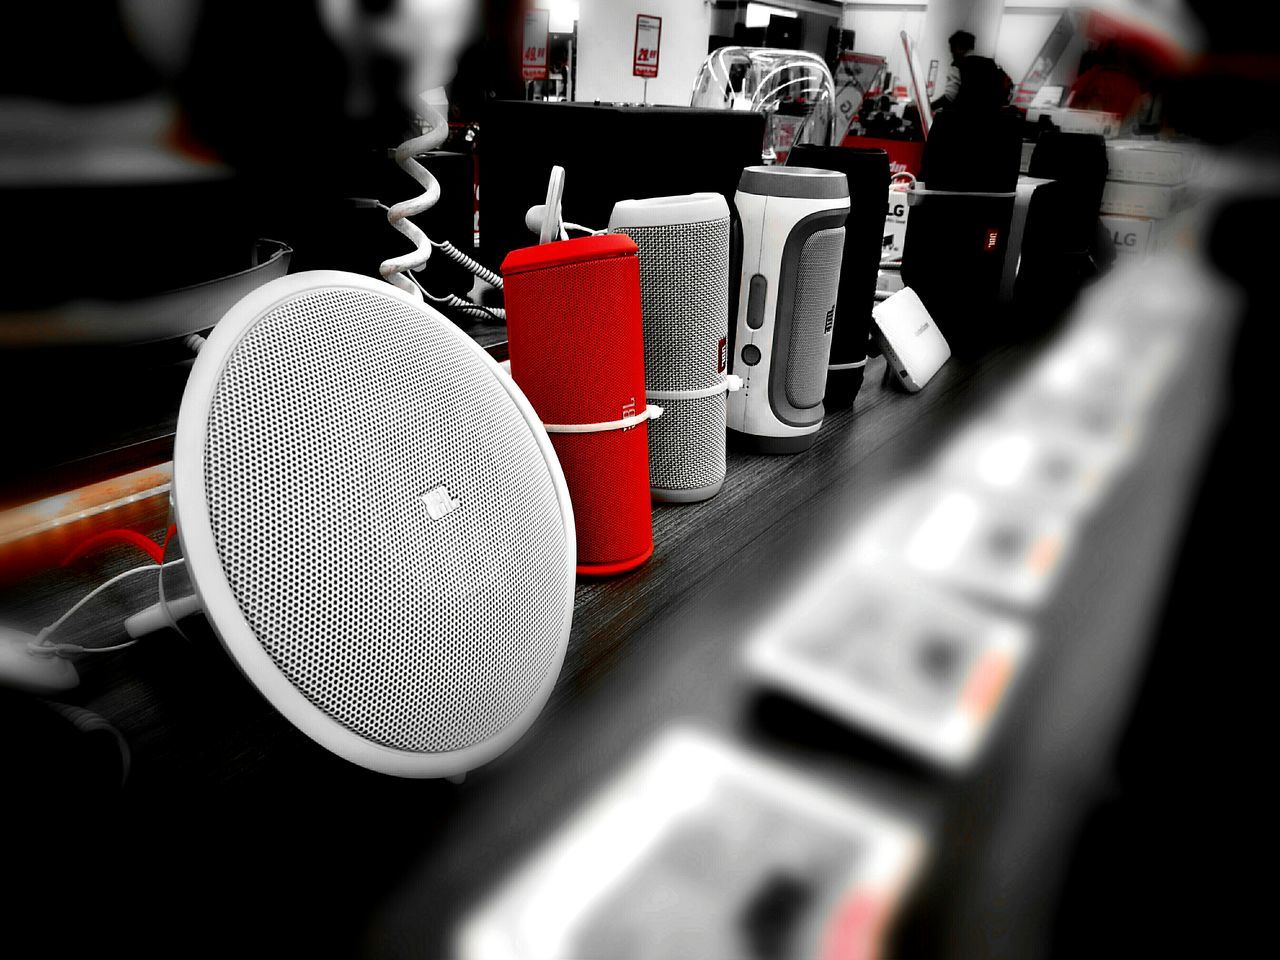 red, selective focus, man made object, large group of objects, no people